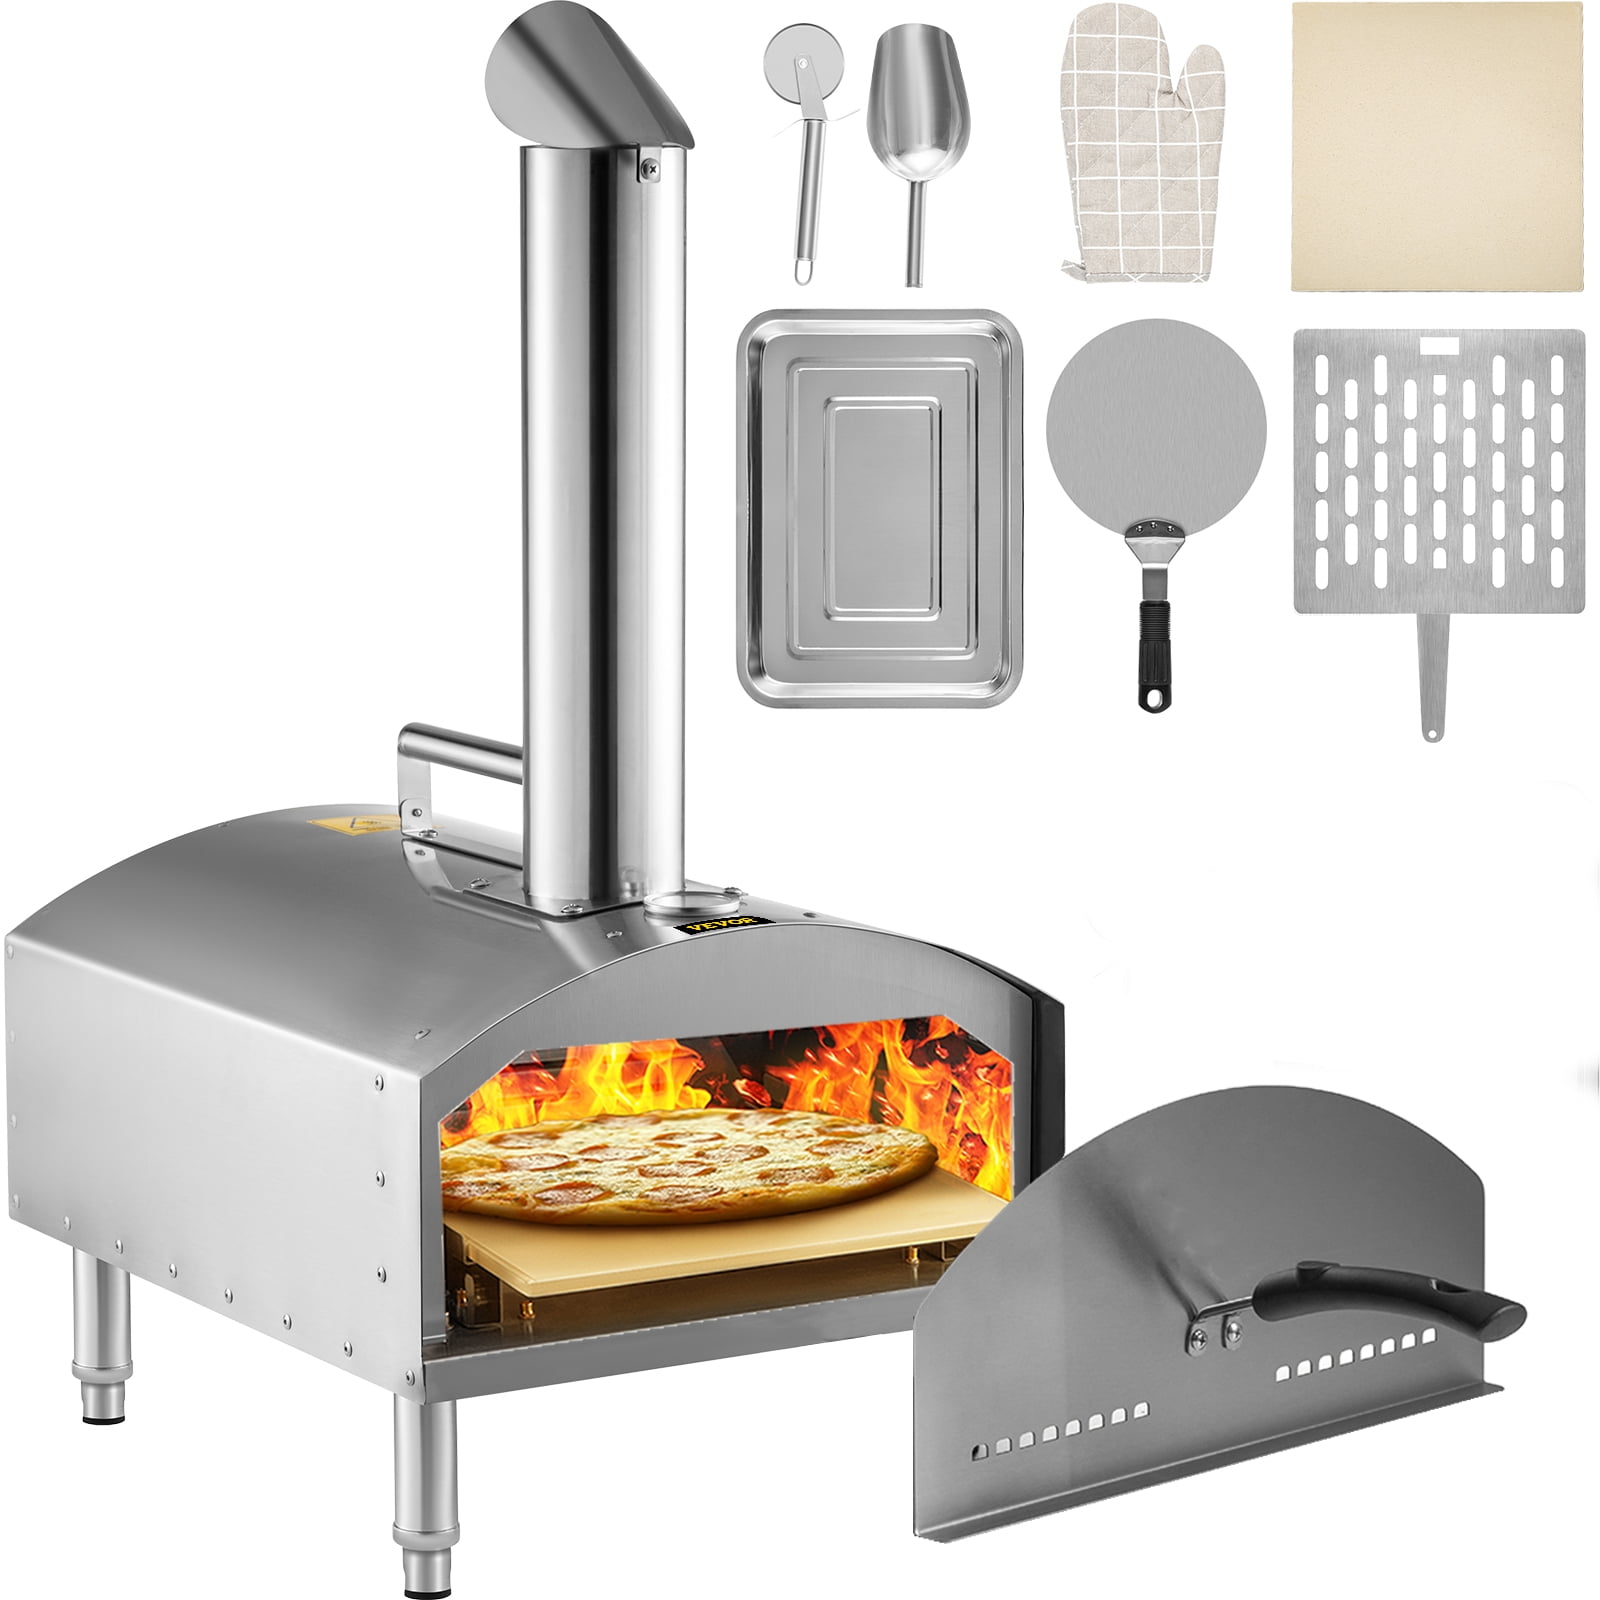 VEVORbrand 12" Wood Fired Oven, Outdoor Stainless Steel Pizza Oven Accessories - Walmart.com